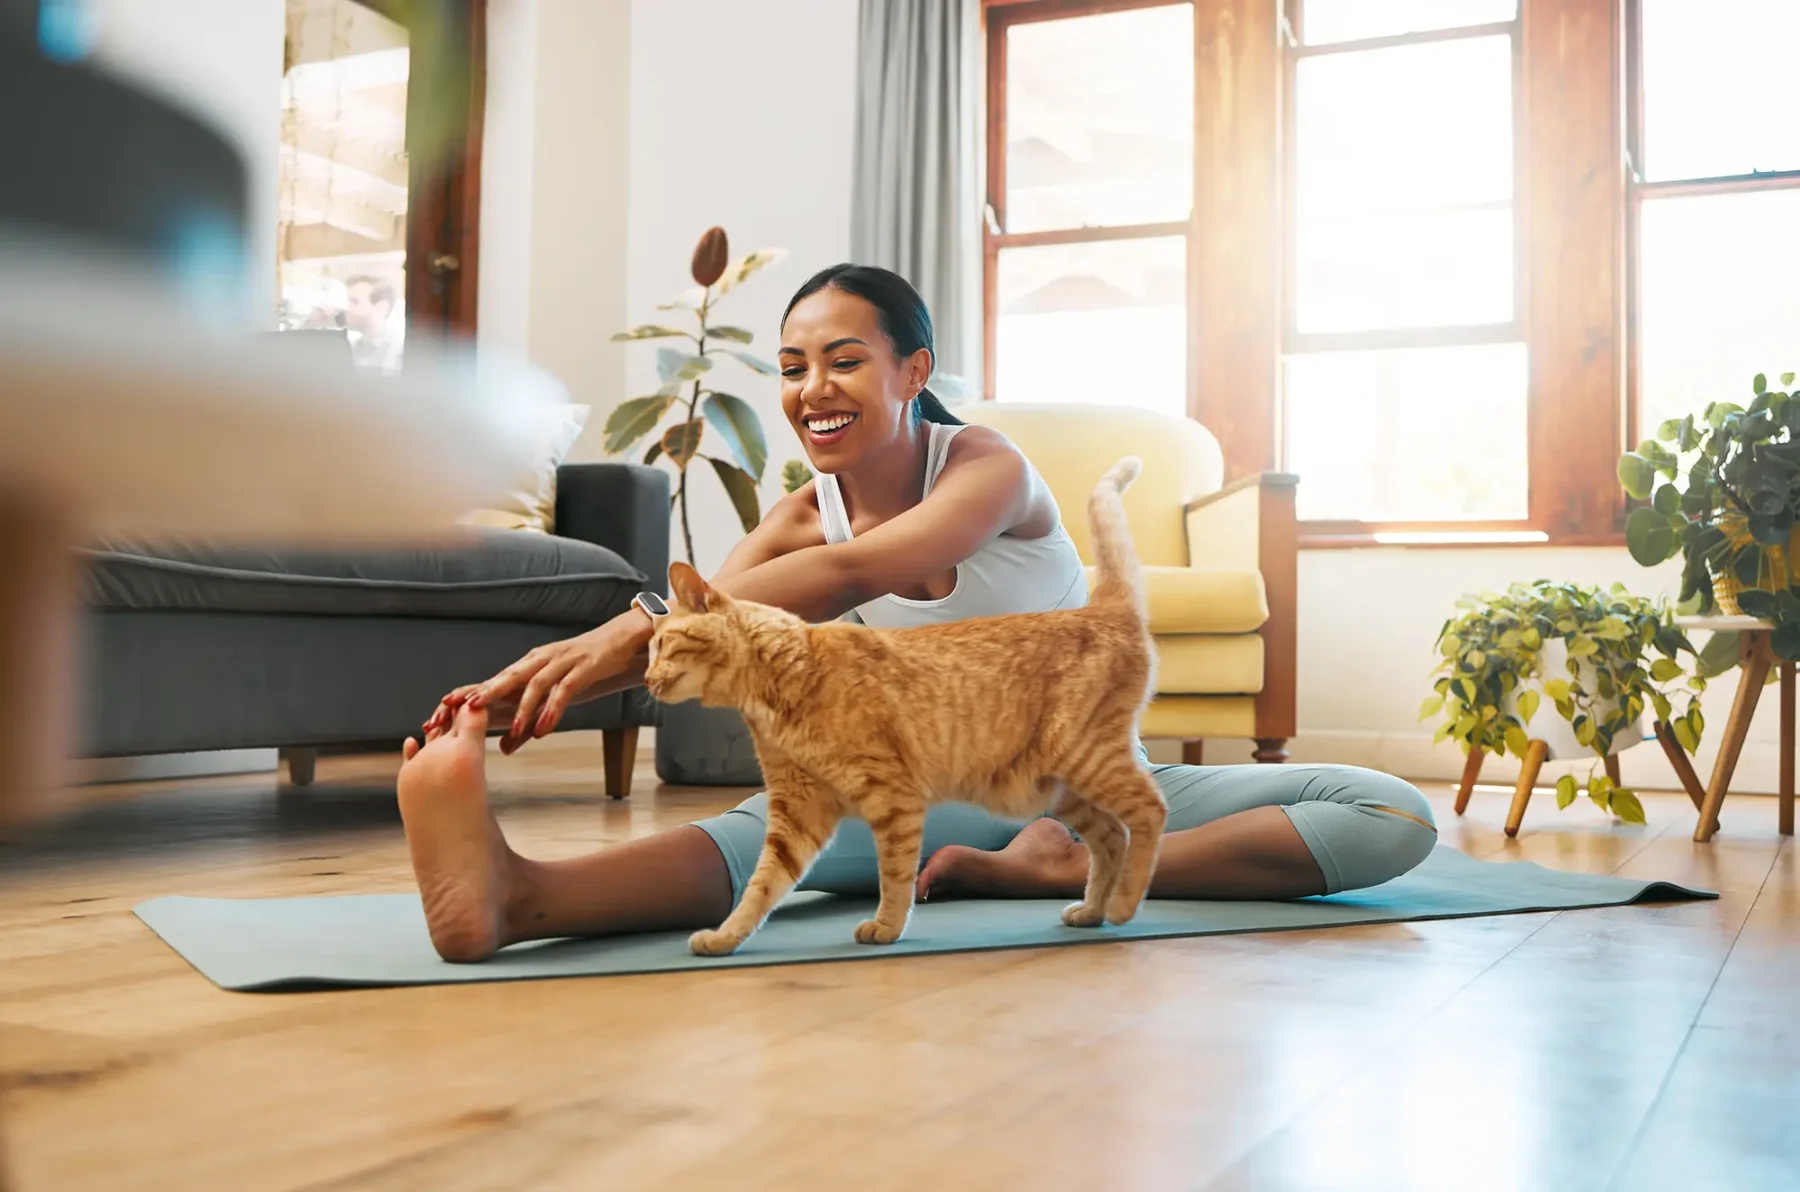 Woman doing yoga in the living room with a cat on the floor next to her